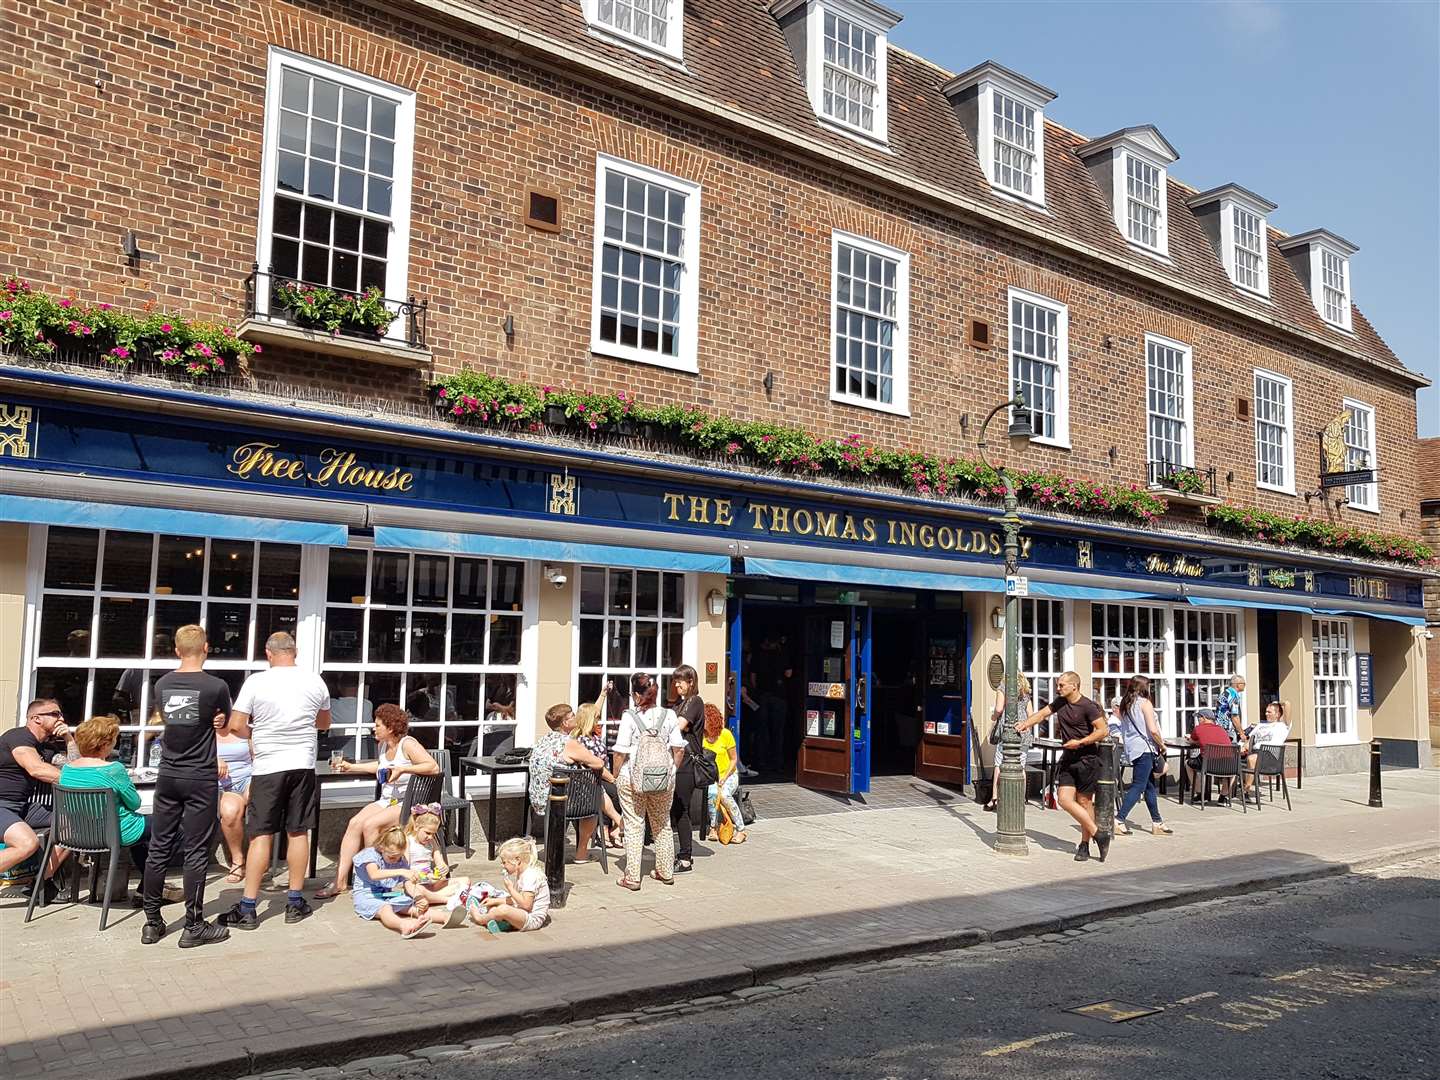 The Thomas Ingoldsby in Canterbury opened as a Wetherspoon pub in 1997